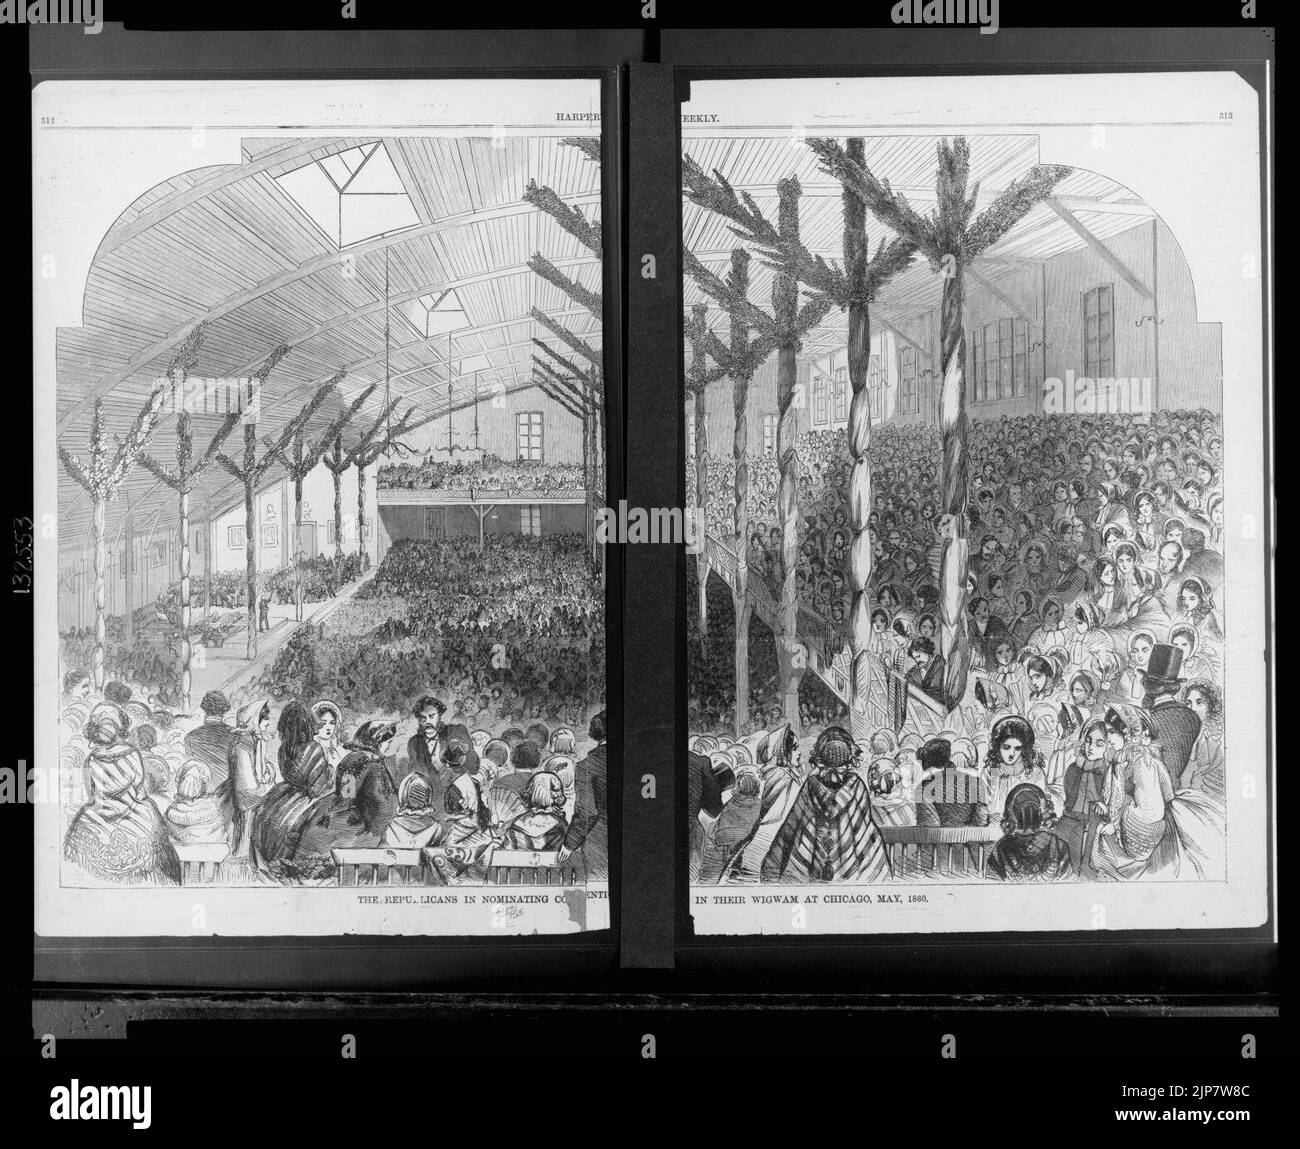 The Republicans in nominating co(nv)ent(ion) in their wigwam at Chicago, May 1860 Stock Photo